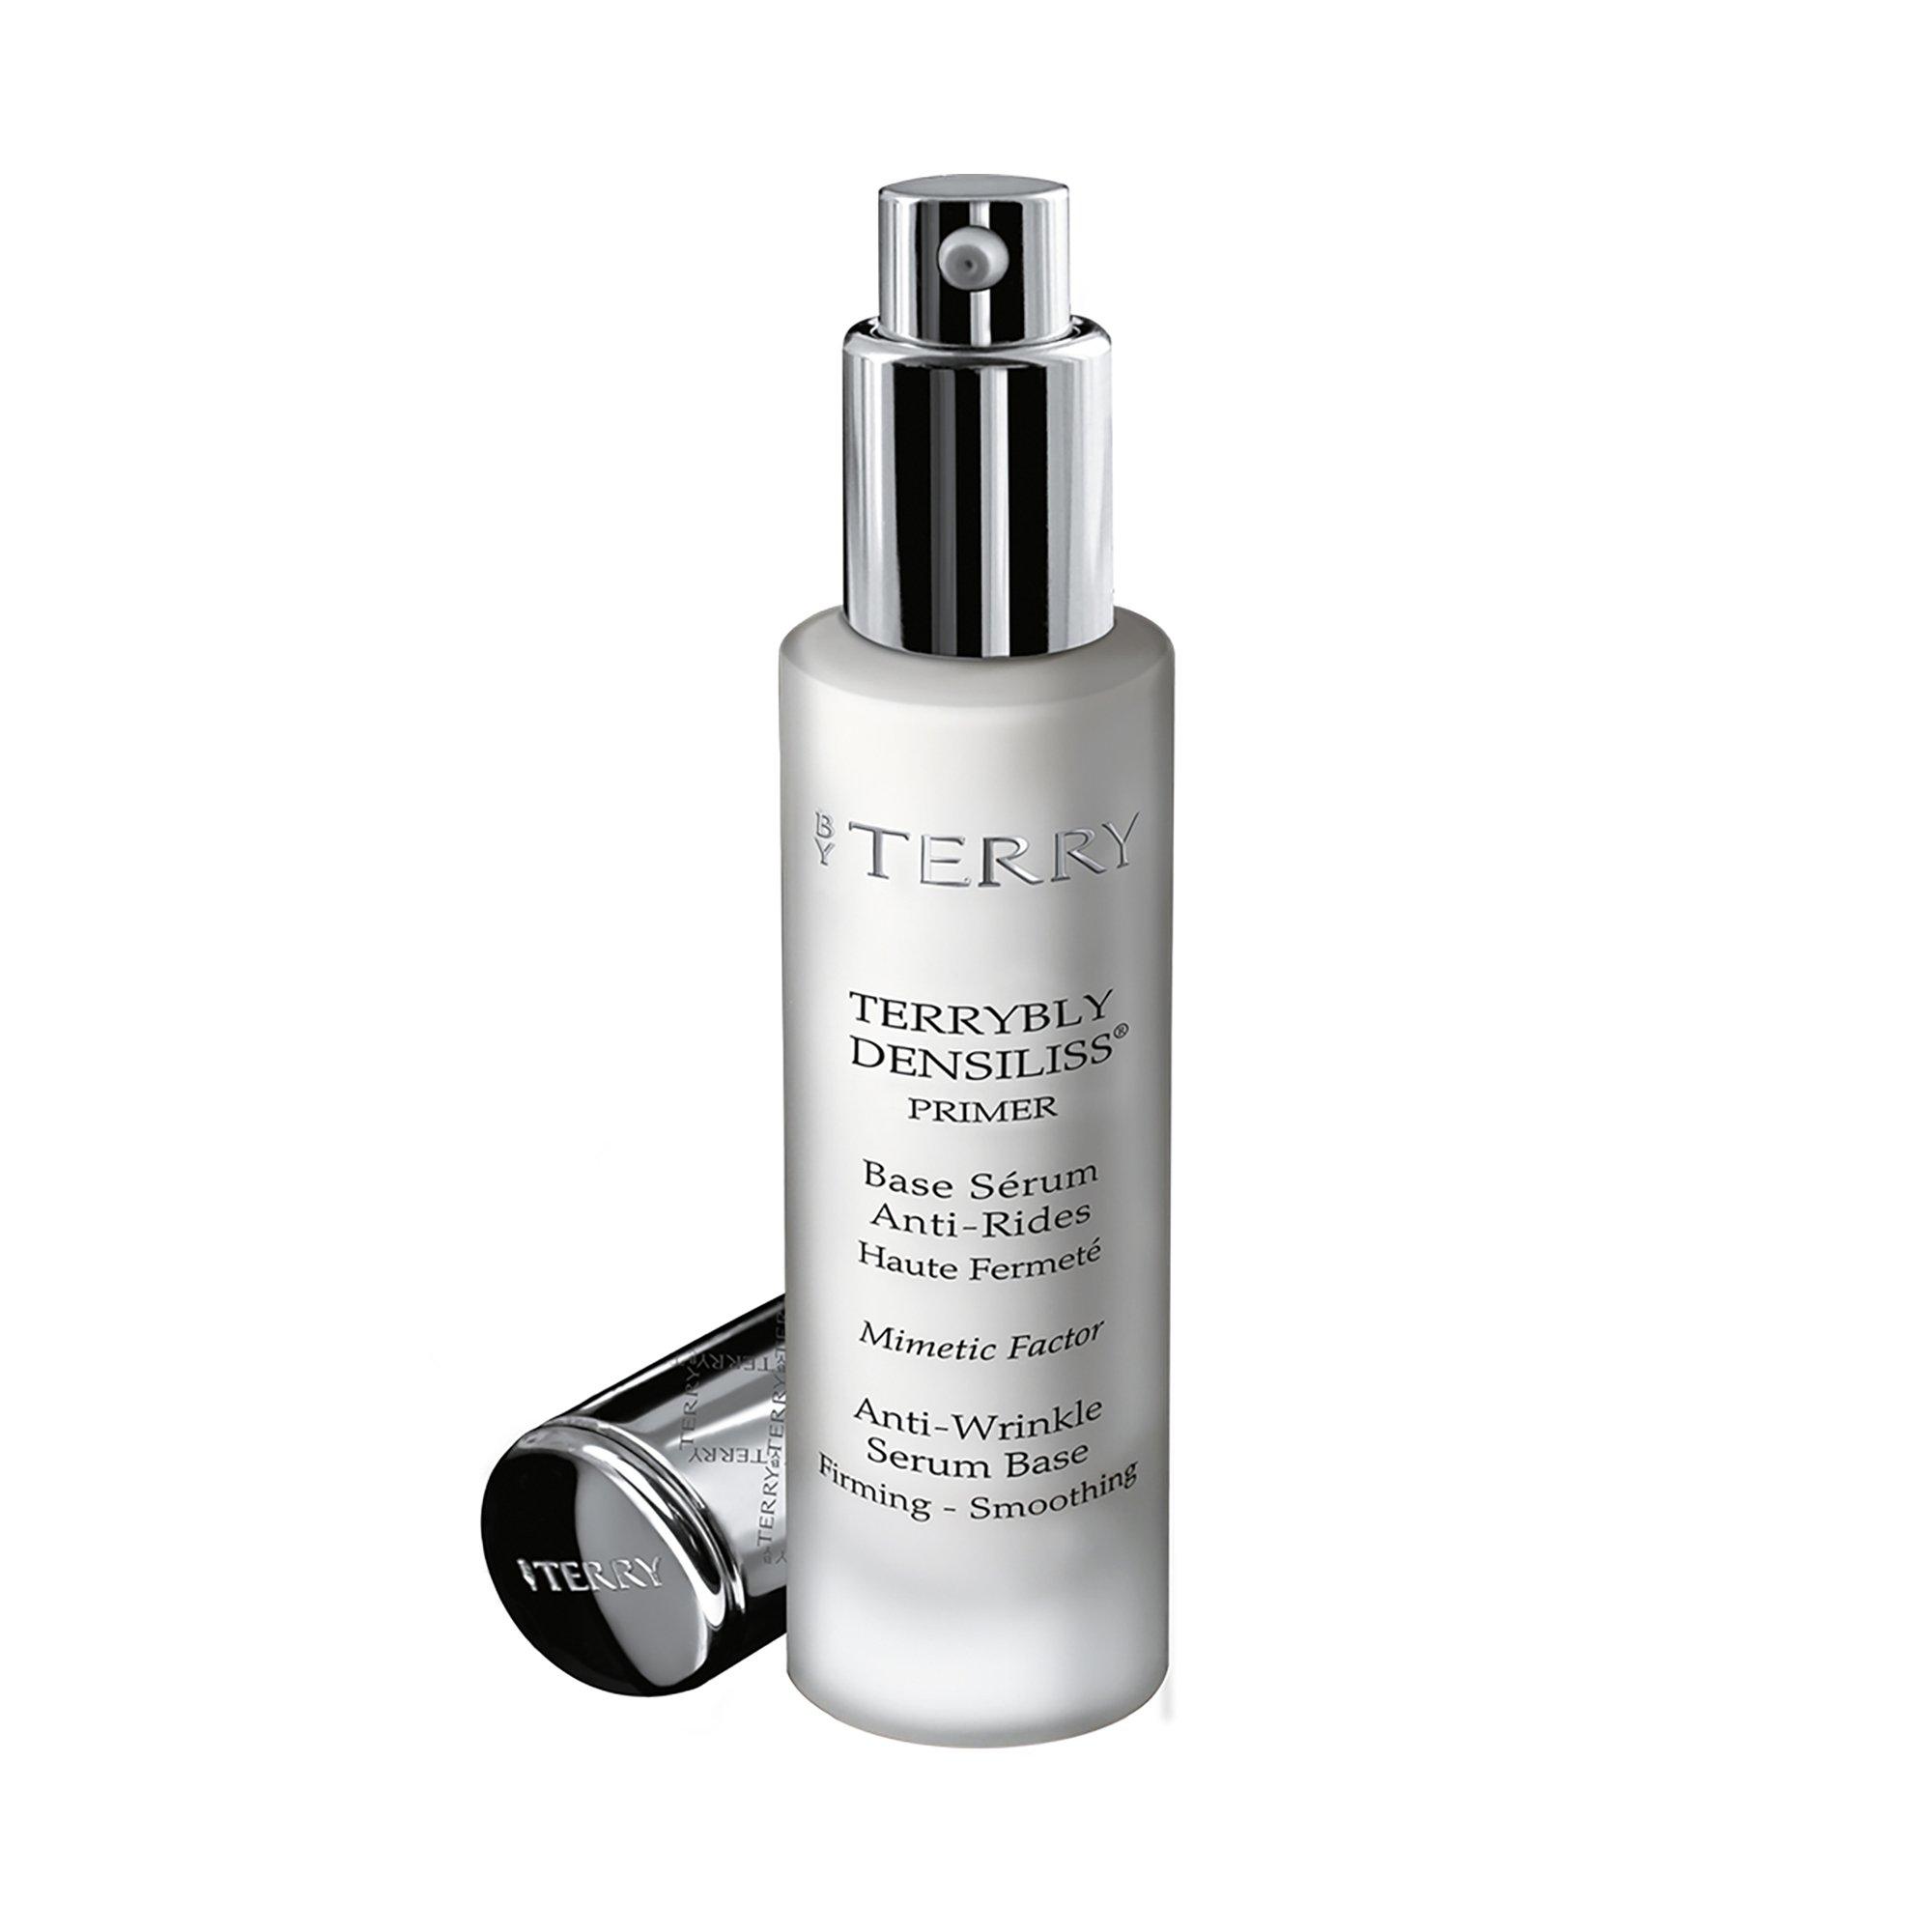 Image of BY TERRY Terribly Densiliss Primer - 30ml